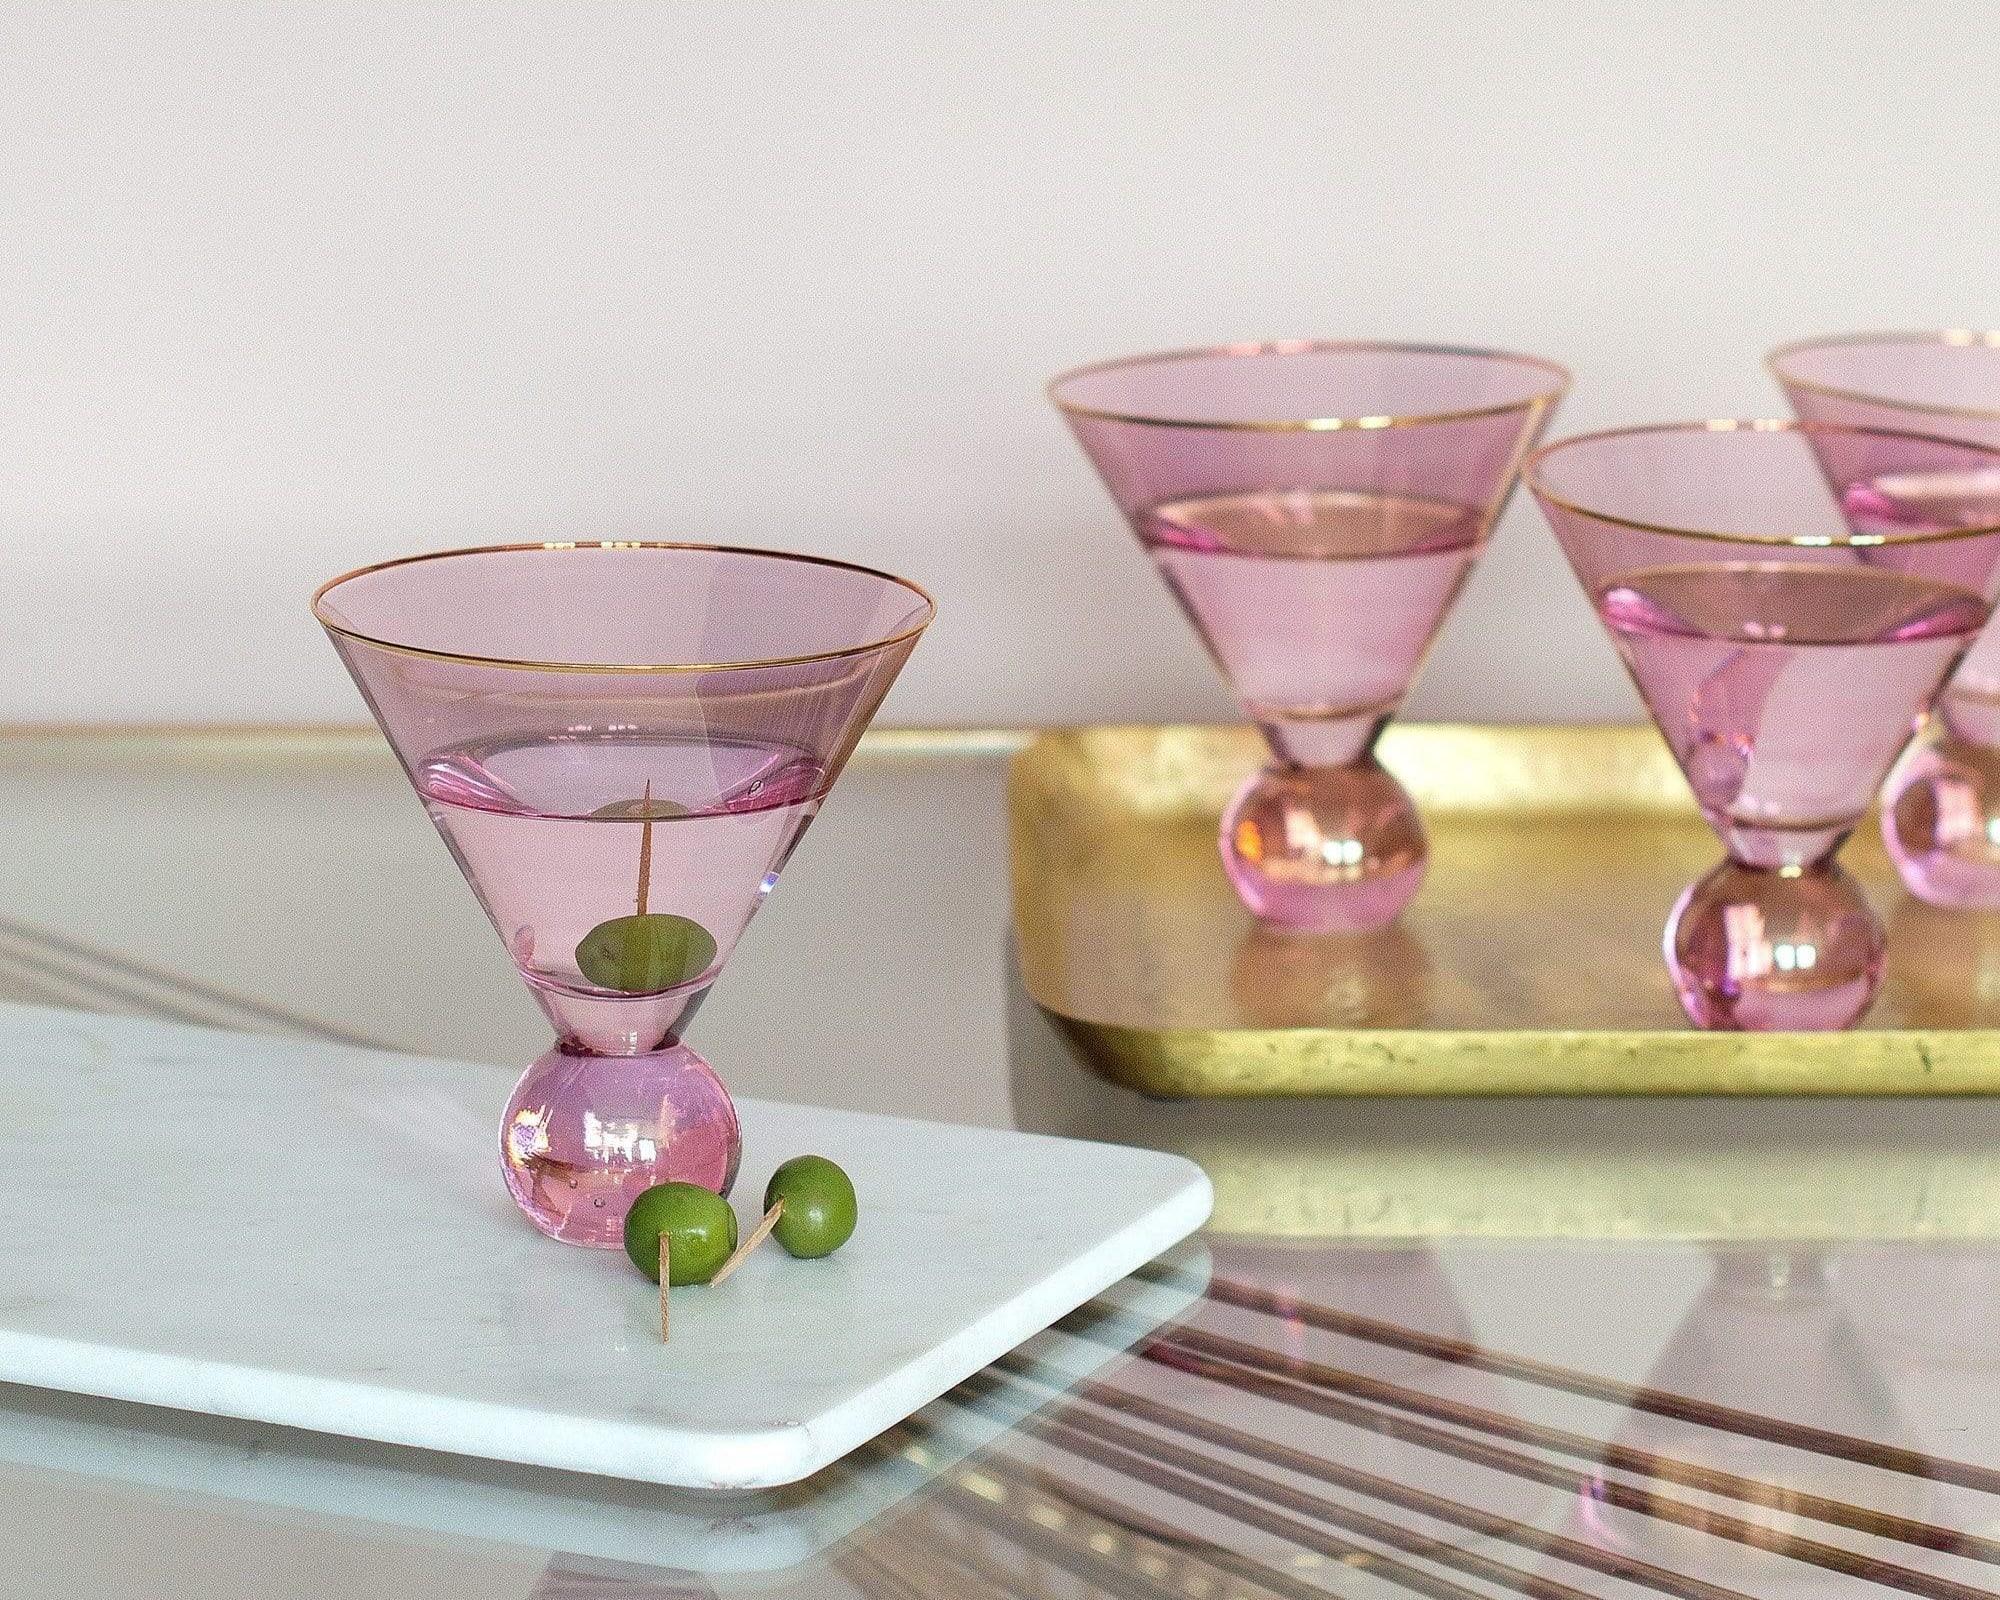 Pink martini glasses with gold rims and a gold tray